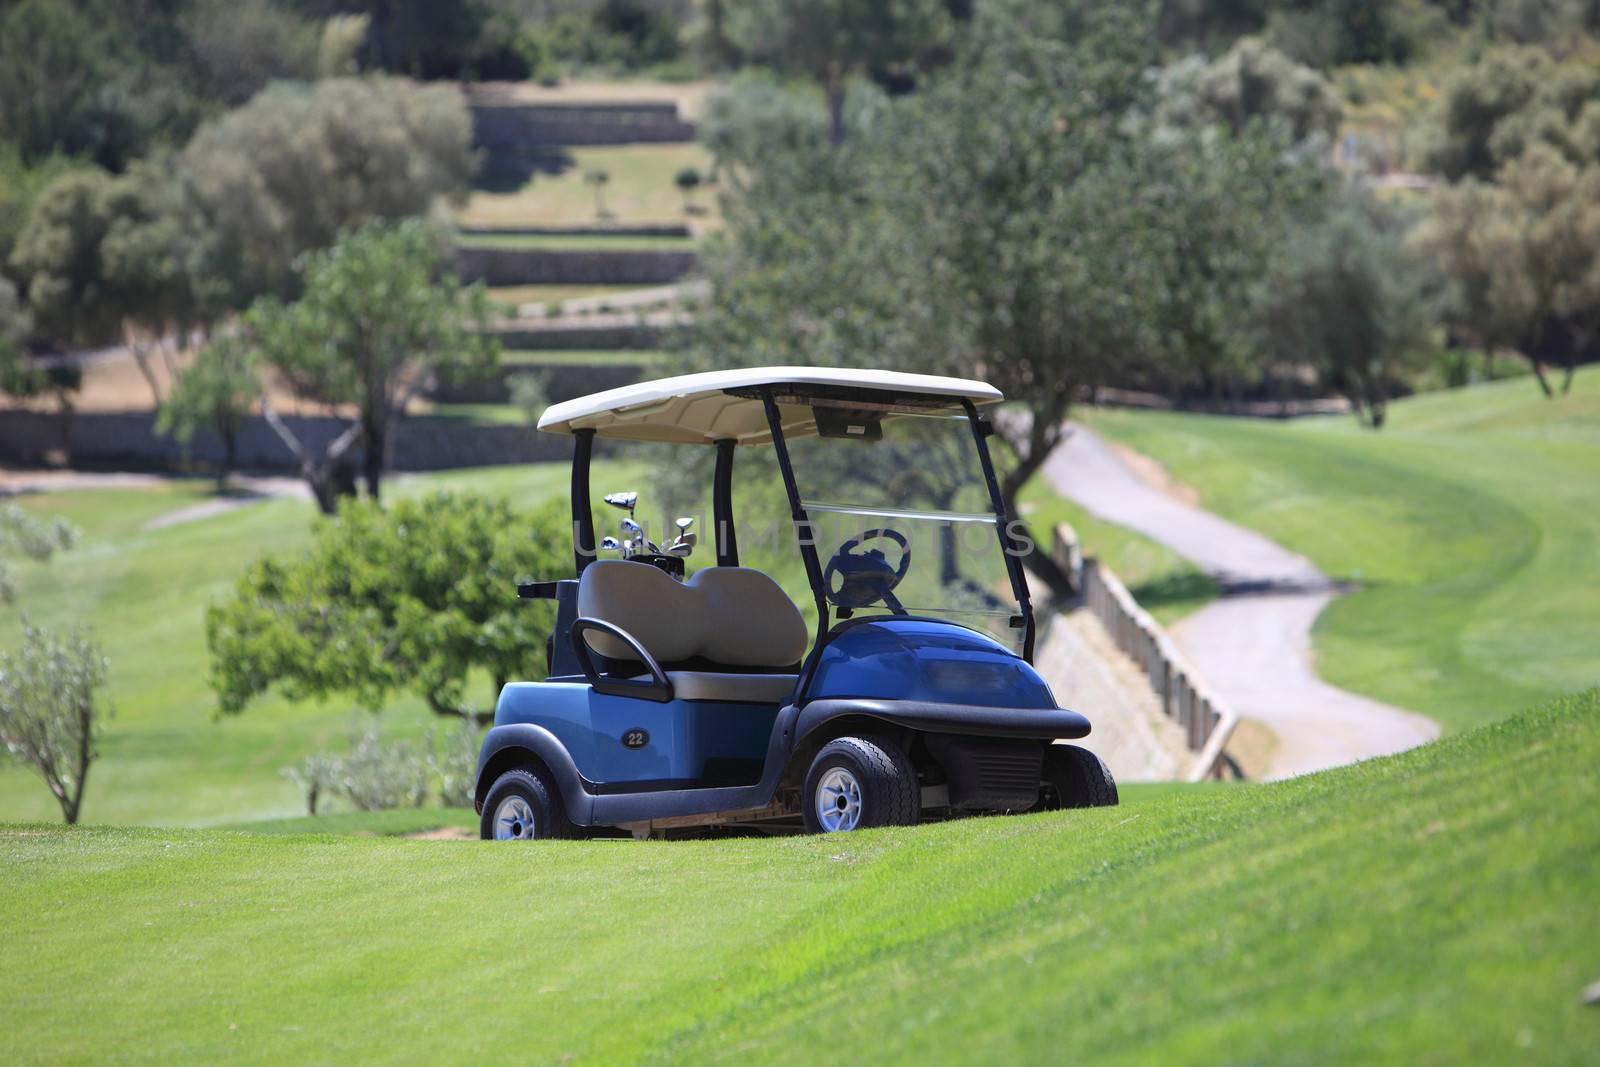 Golf cart parked on a golf course at the edge of a fairway used to transport the players and their clubs